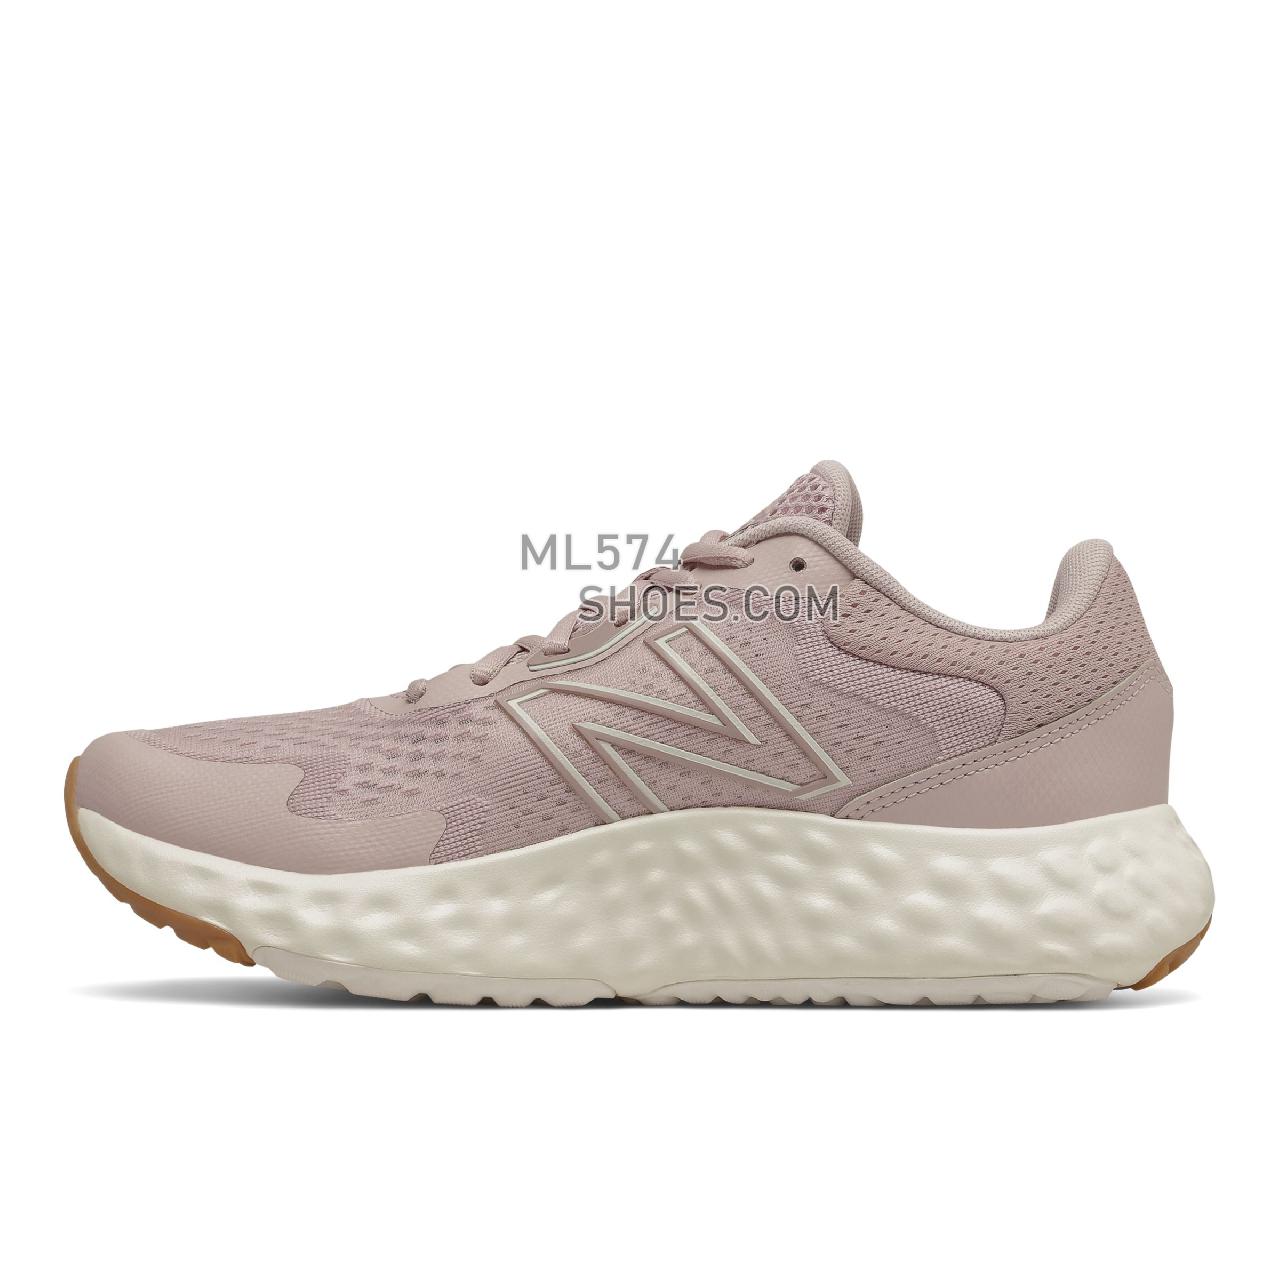 New Balance WEVOZV1 - Women's Classic Sneakers - Oyster Pink - WEVOZCN1